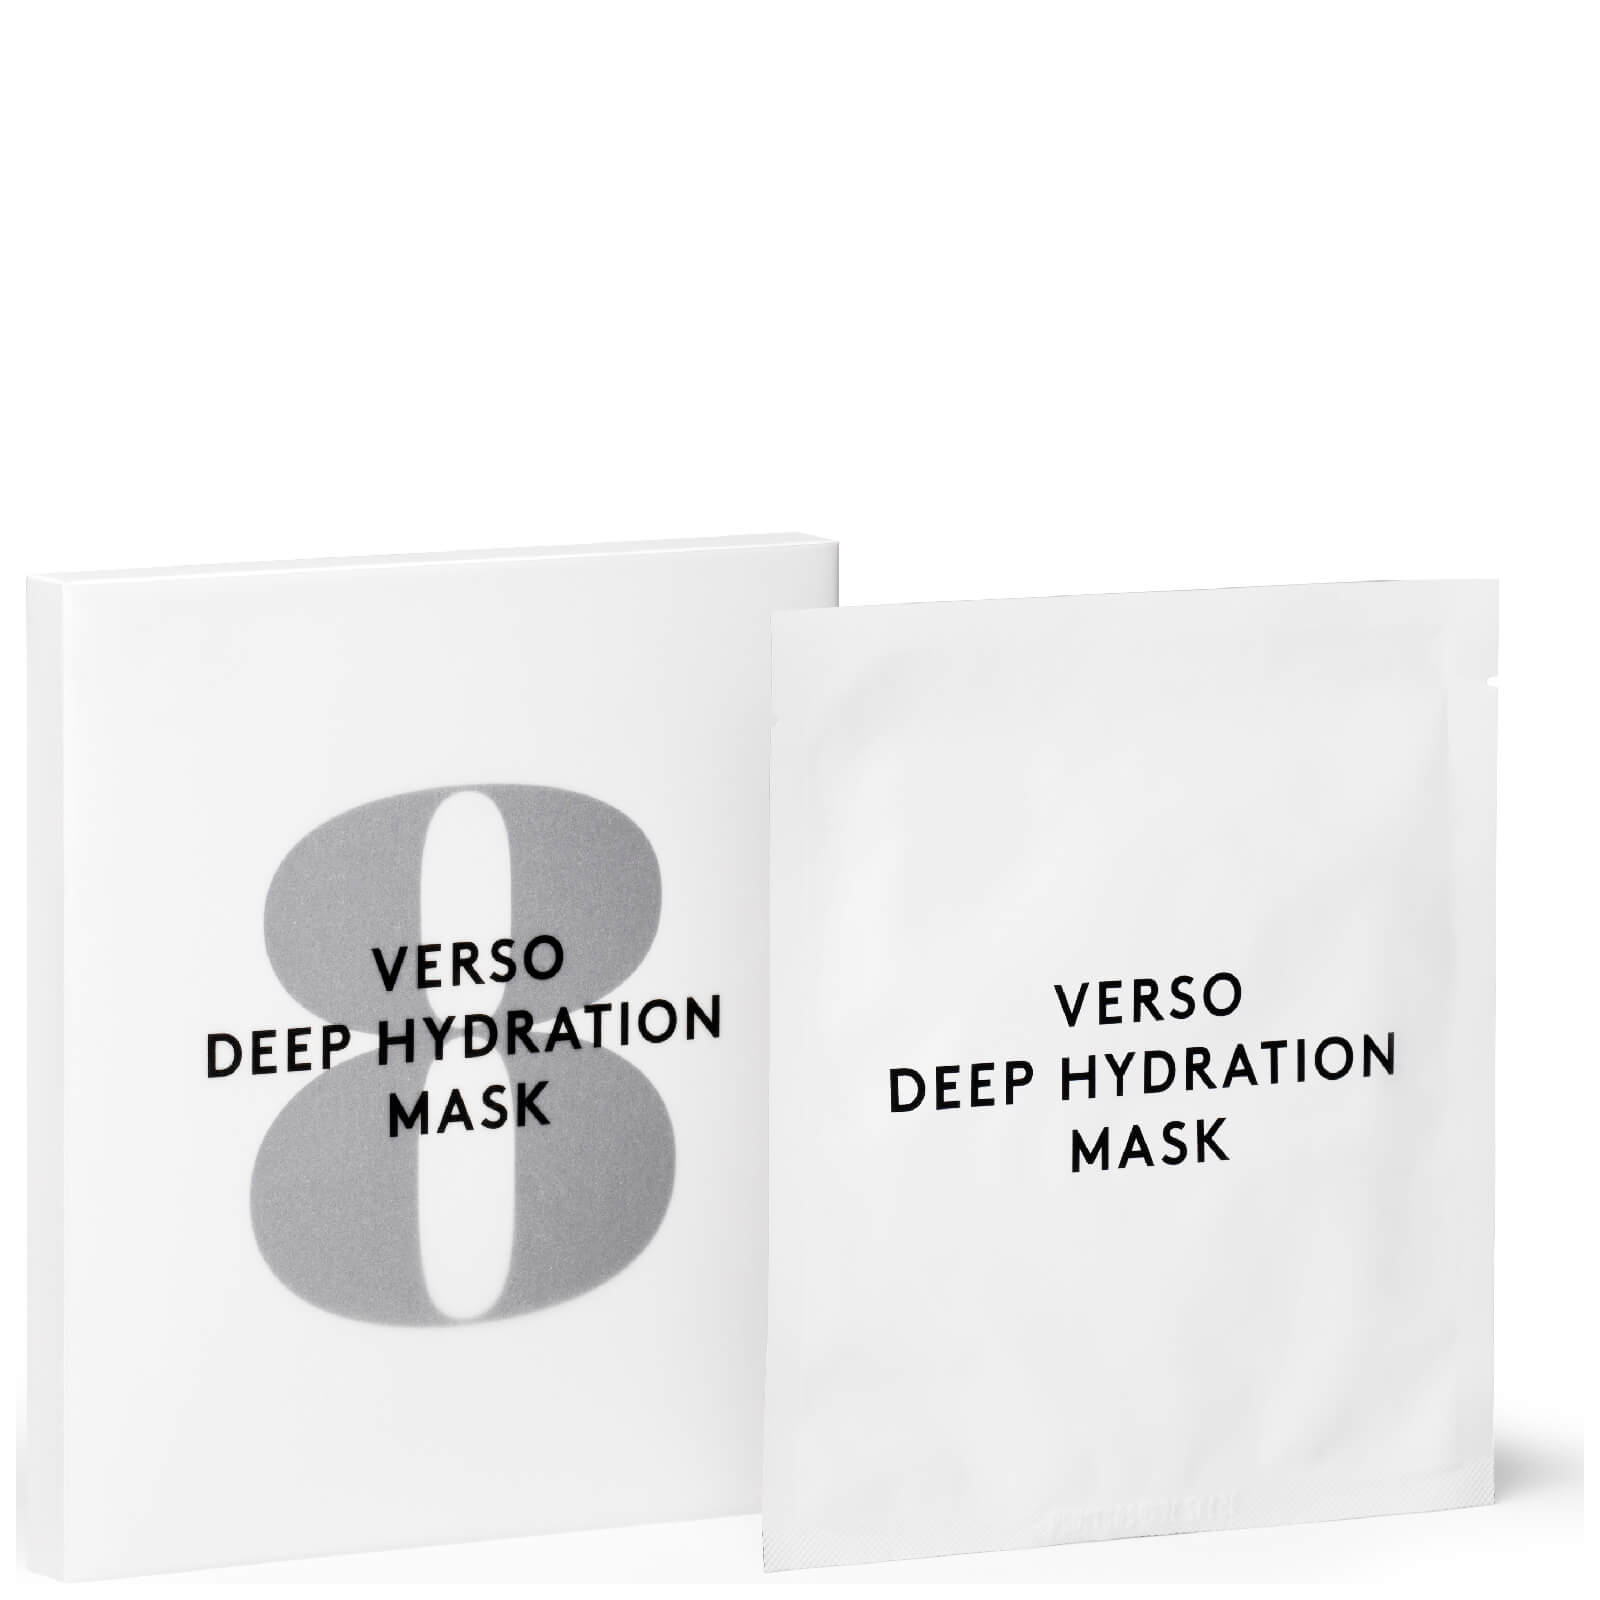 VERSO Deep Hydration Mask (4 Pack)